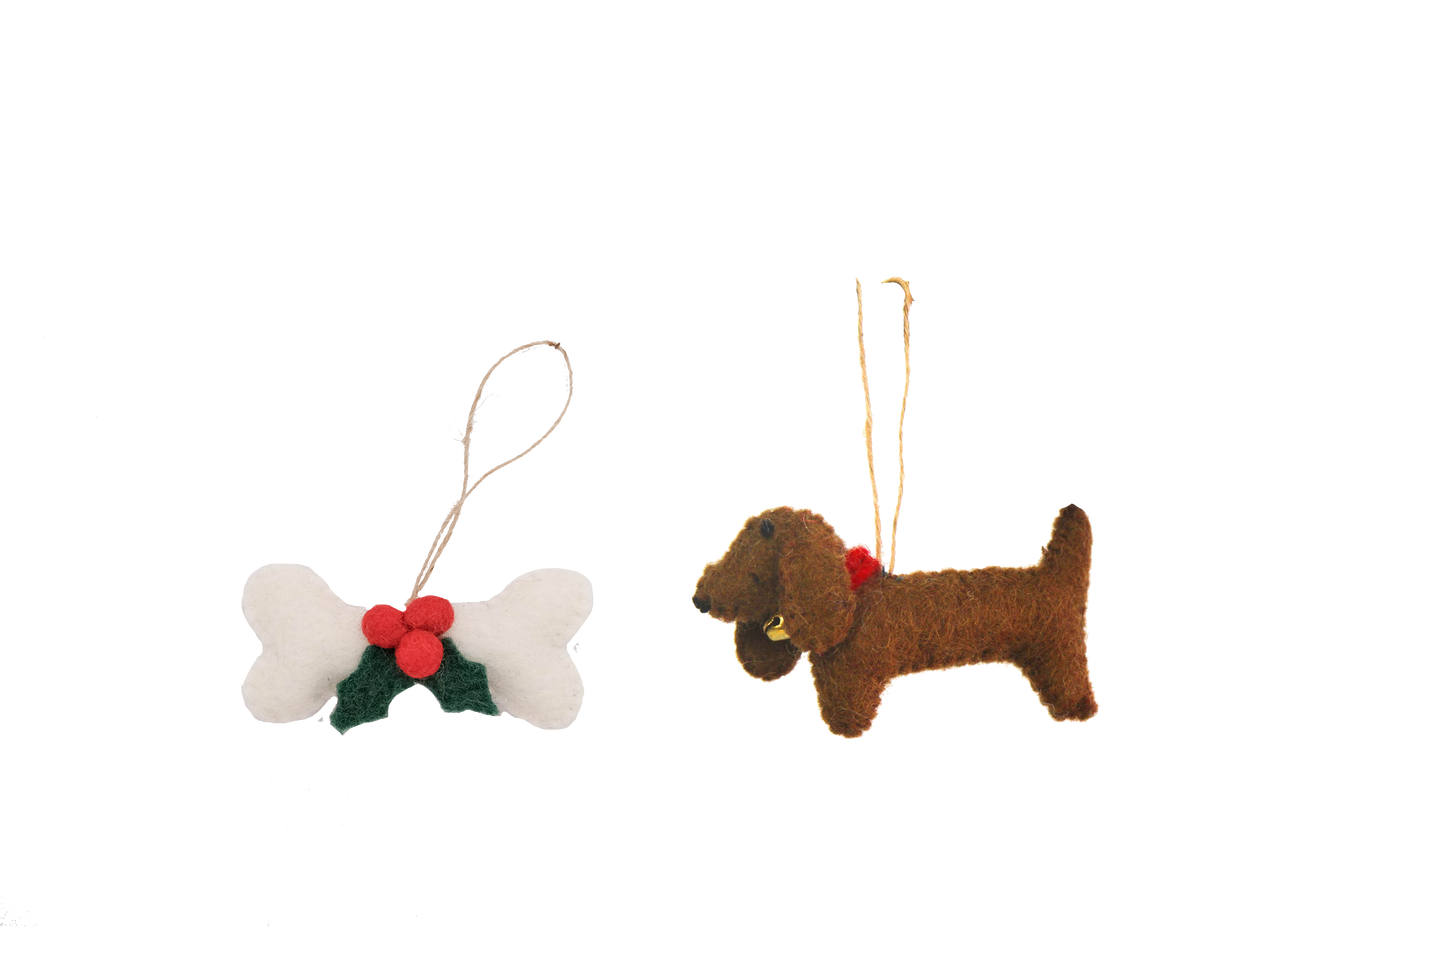 This Global Groove Life, handmade, ethical, fair trade, eco-friendly, sustainable, brown, Dachsund Dog with white, green and red bone treat ornament set was created by artisans in Kathmandu Nepal and will be a beautiful addition to your Christmas tree this holiday season.